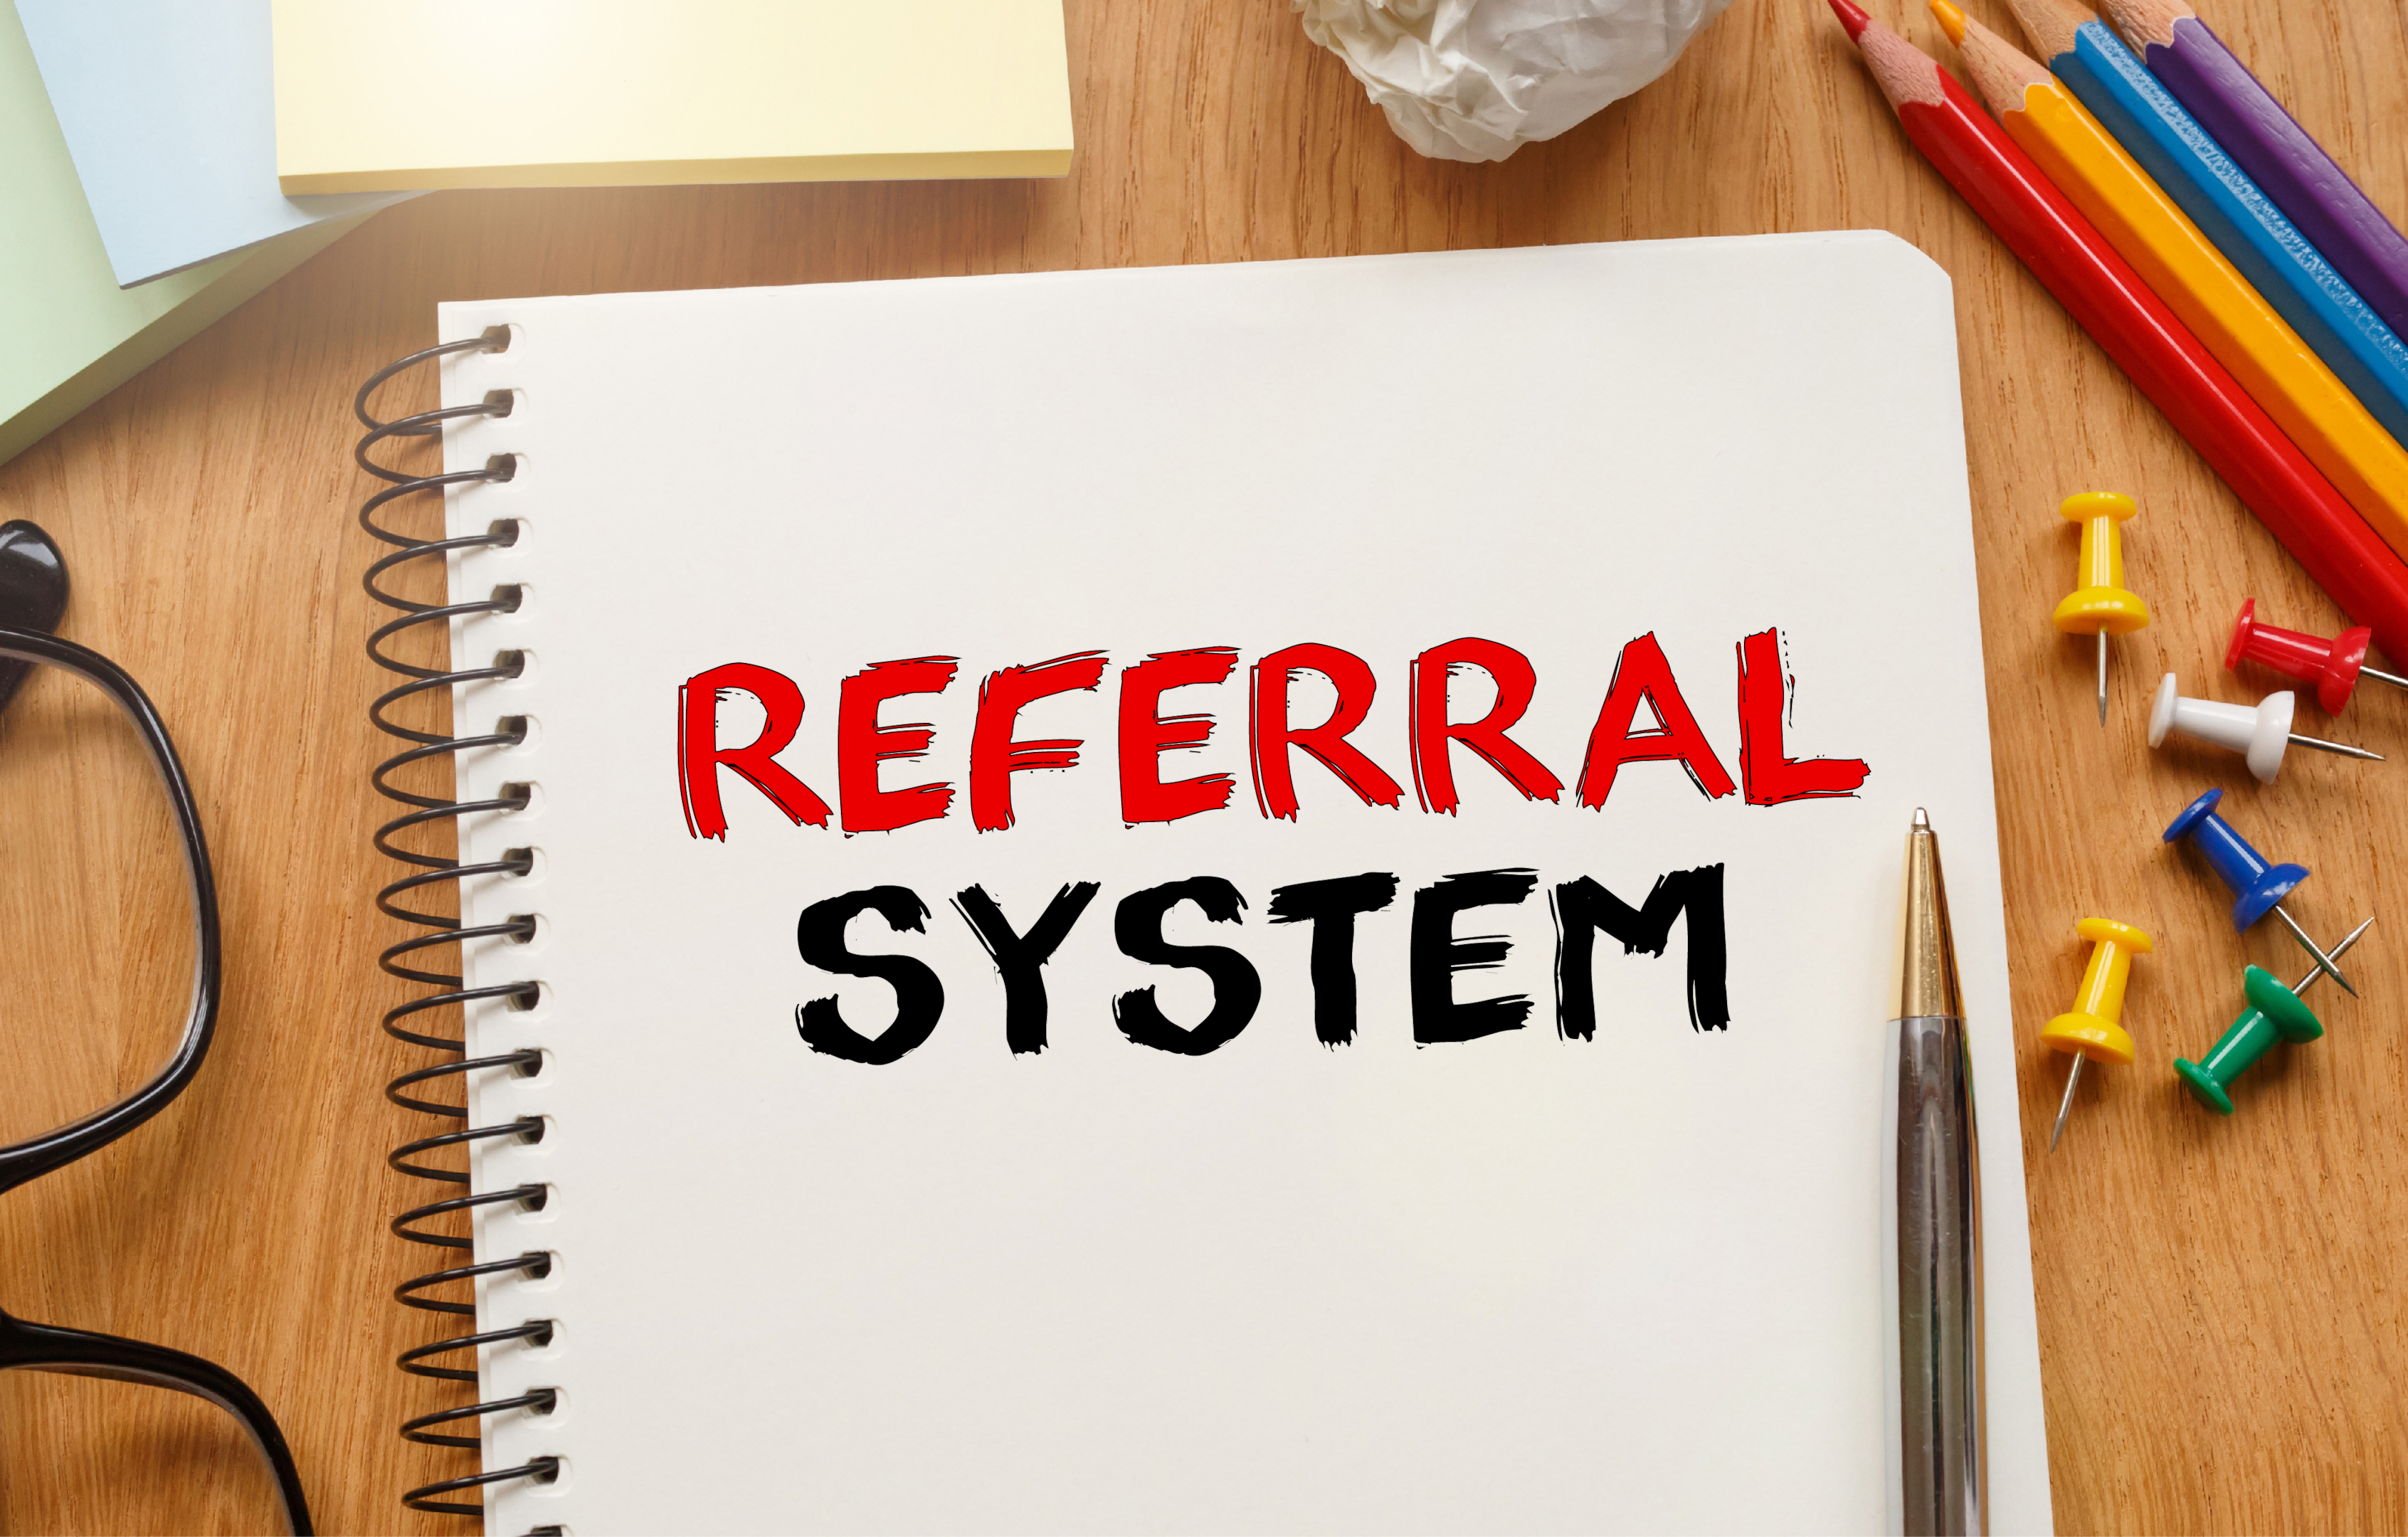 Referral system on a notebook